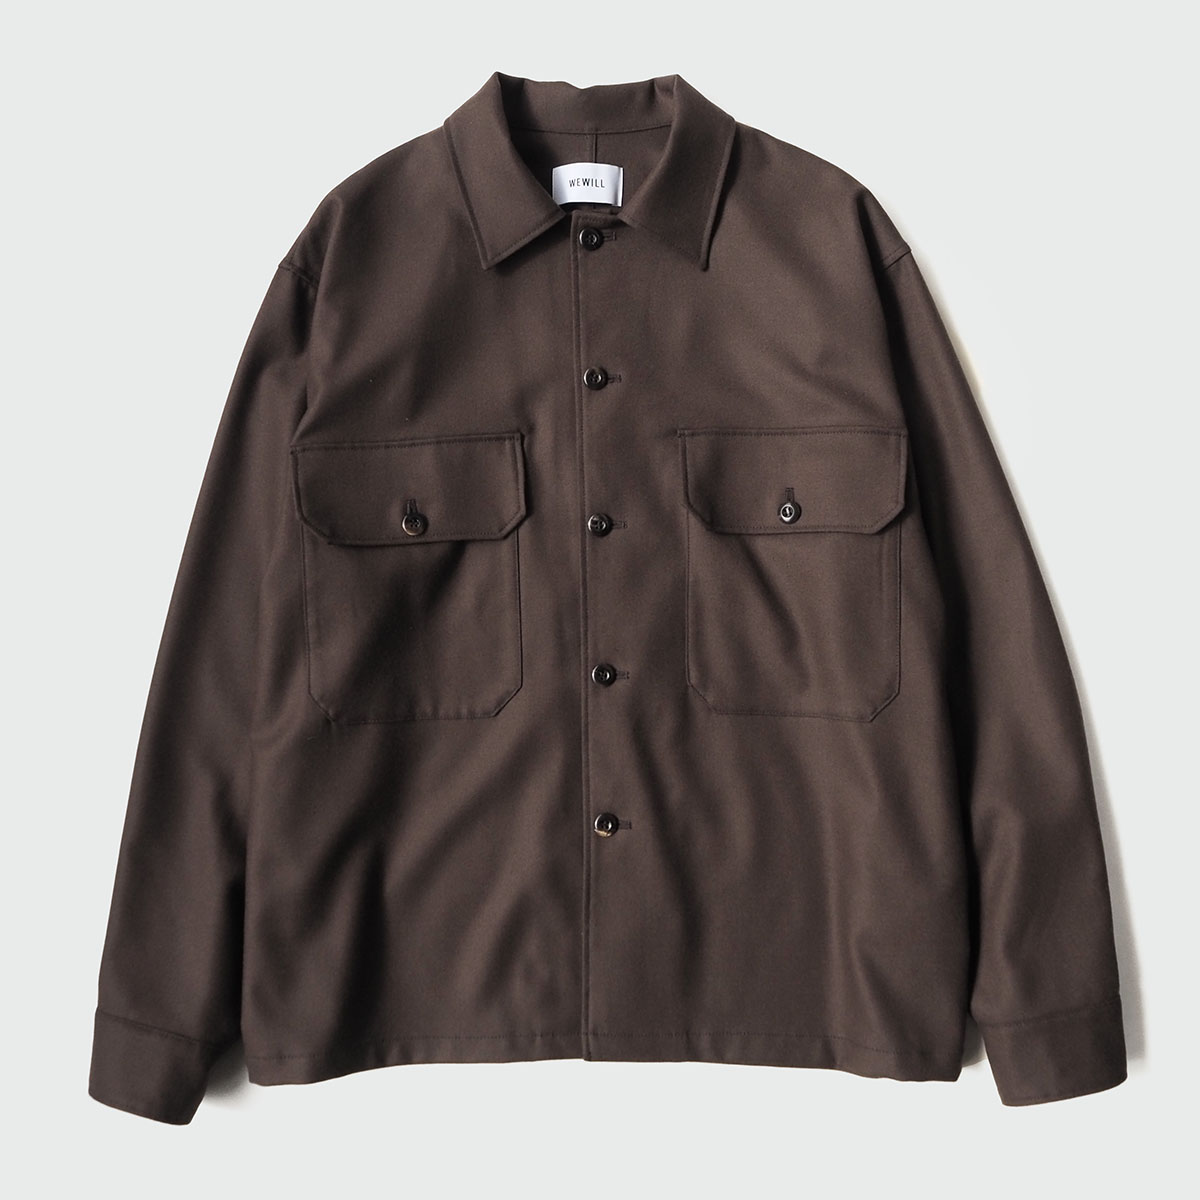 WEWILL ウィーウィル FATIGUE SHIRT Brown a